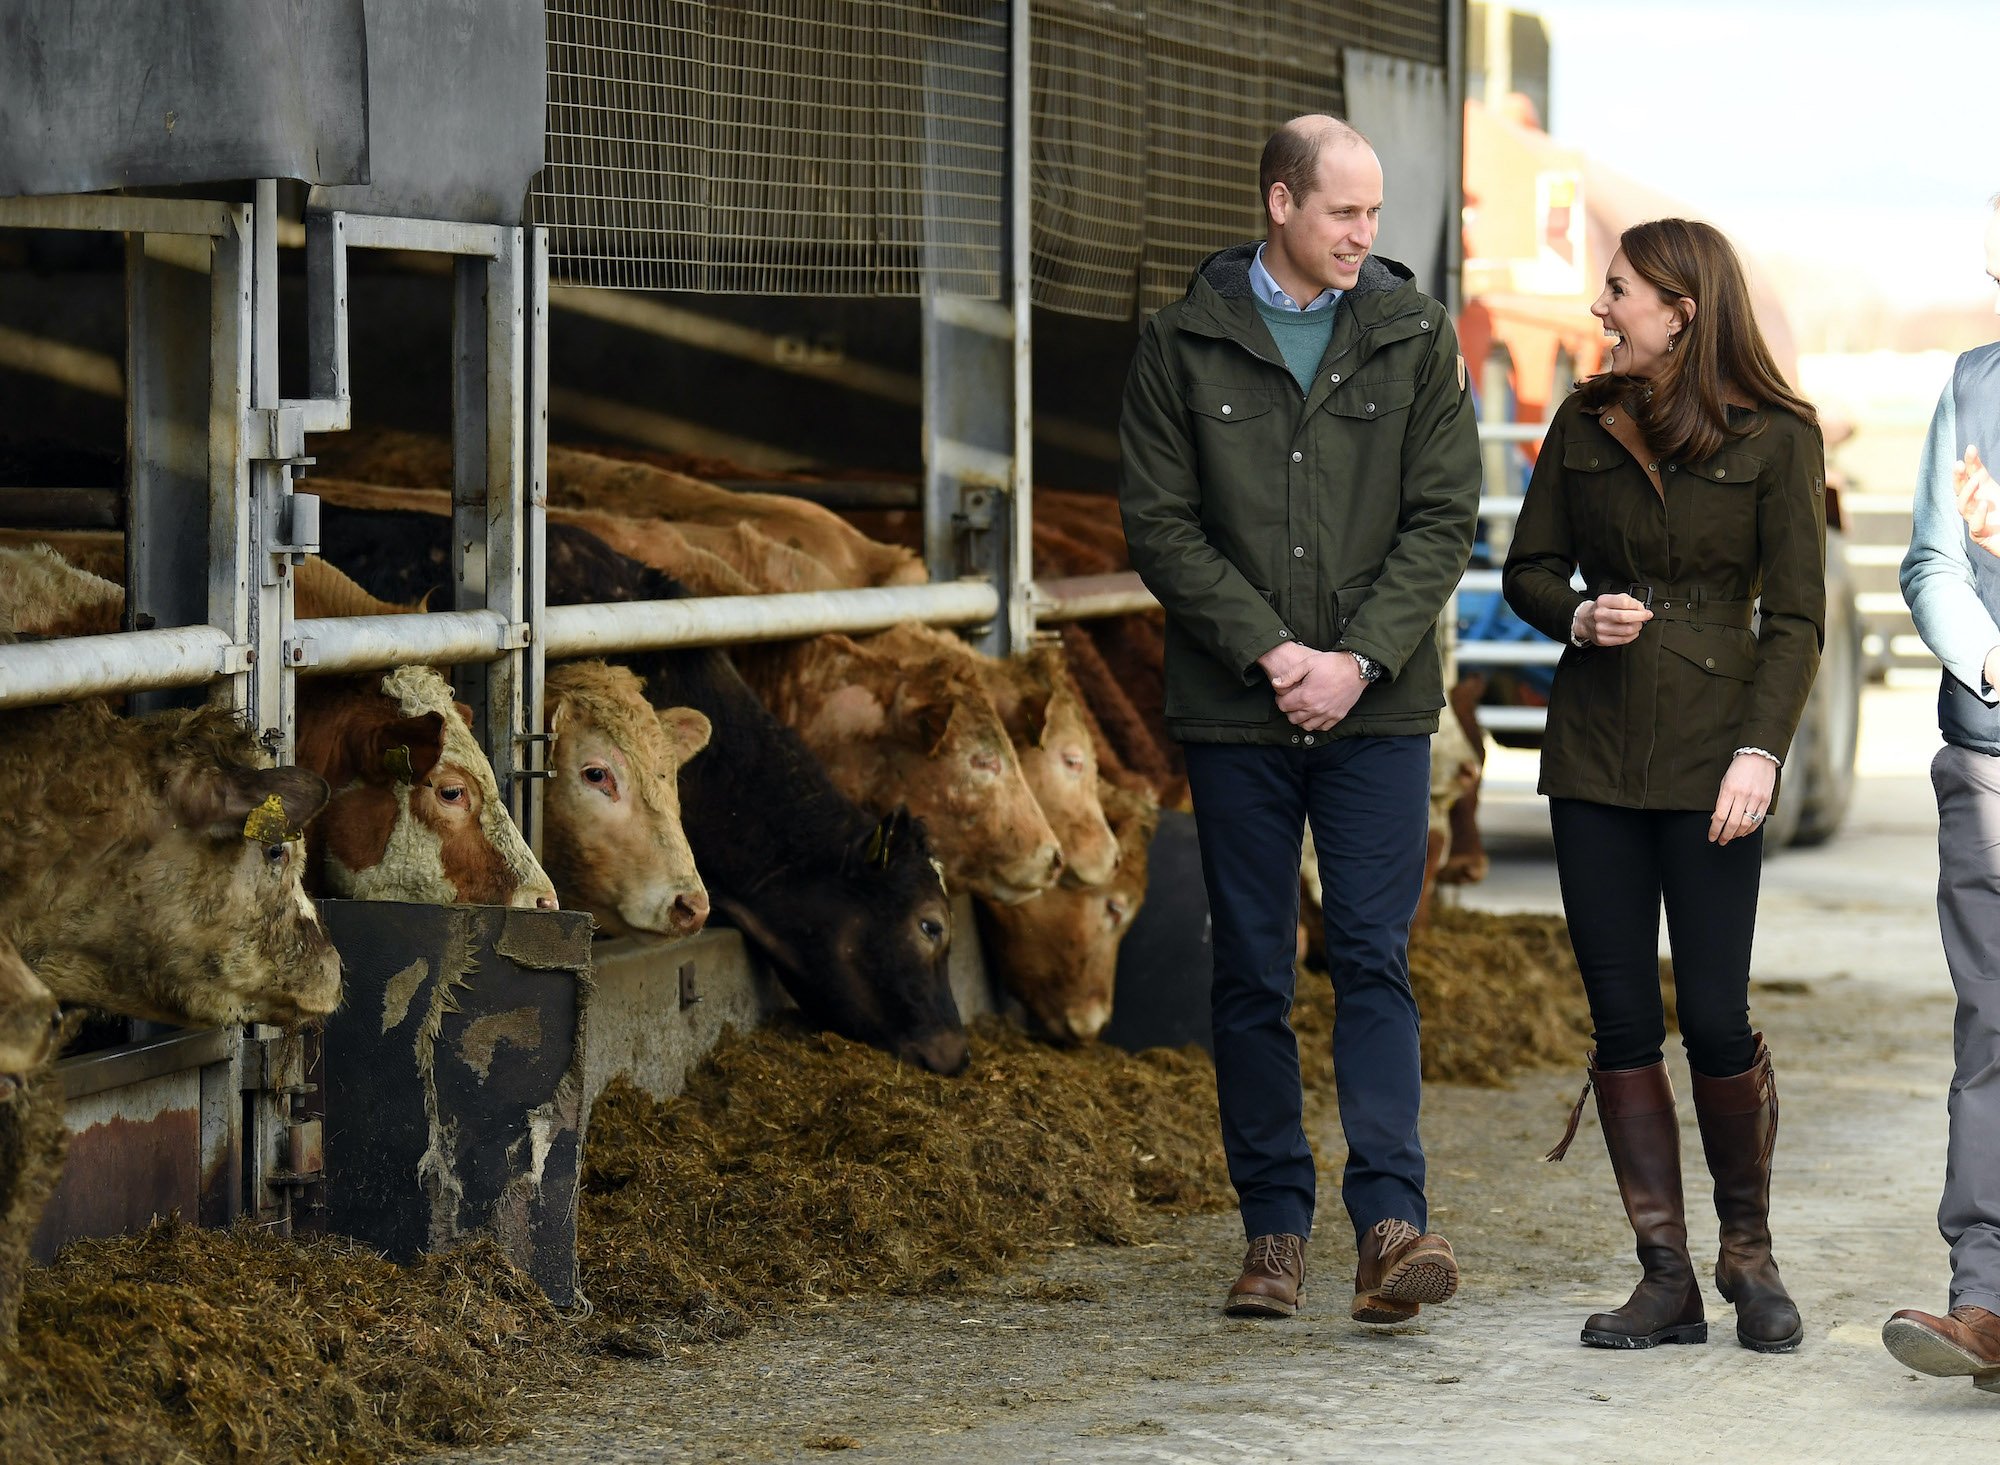 Prince William and Kate Middleton walking though a farm